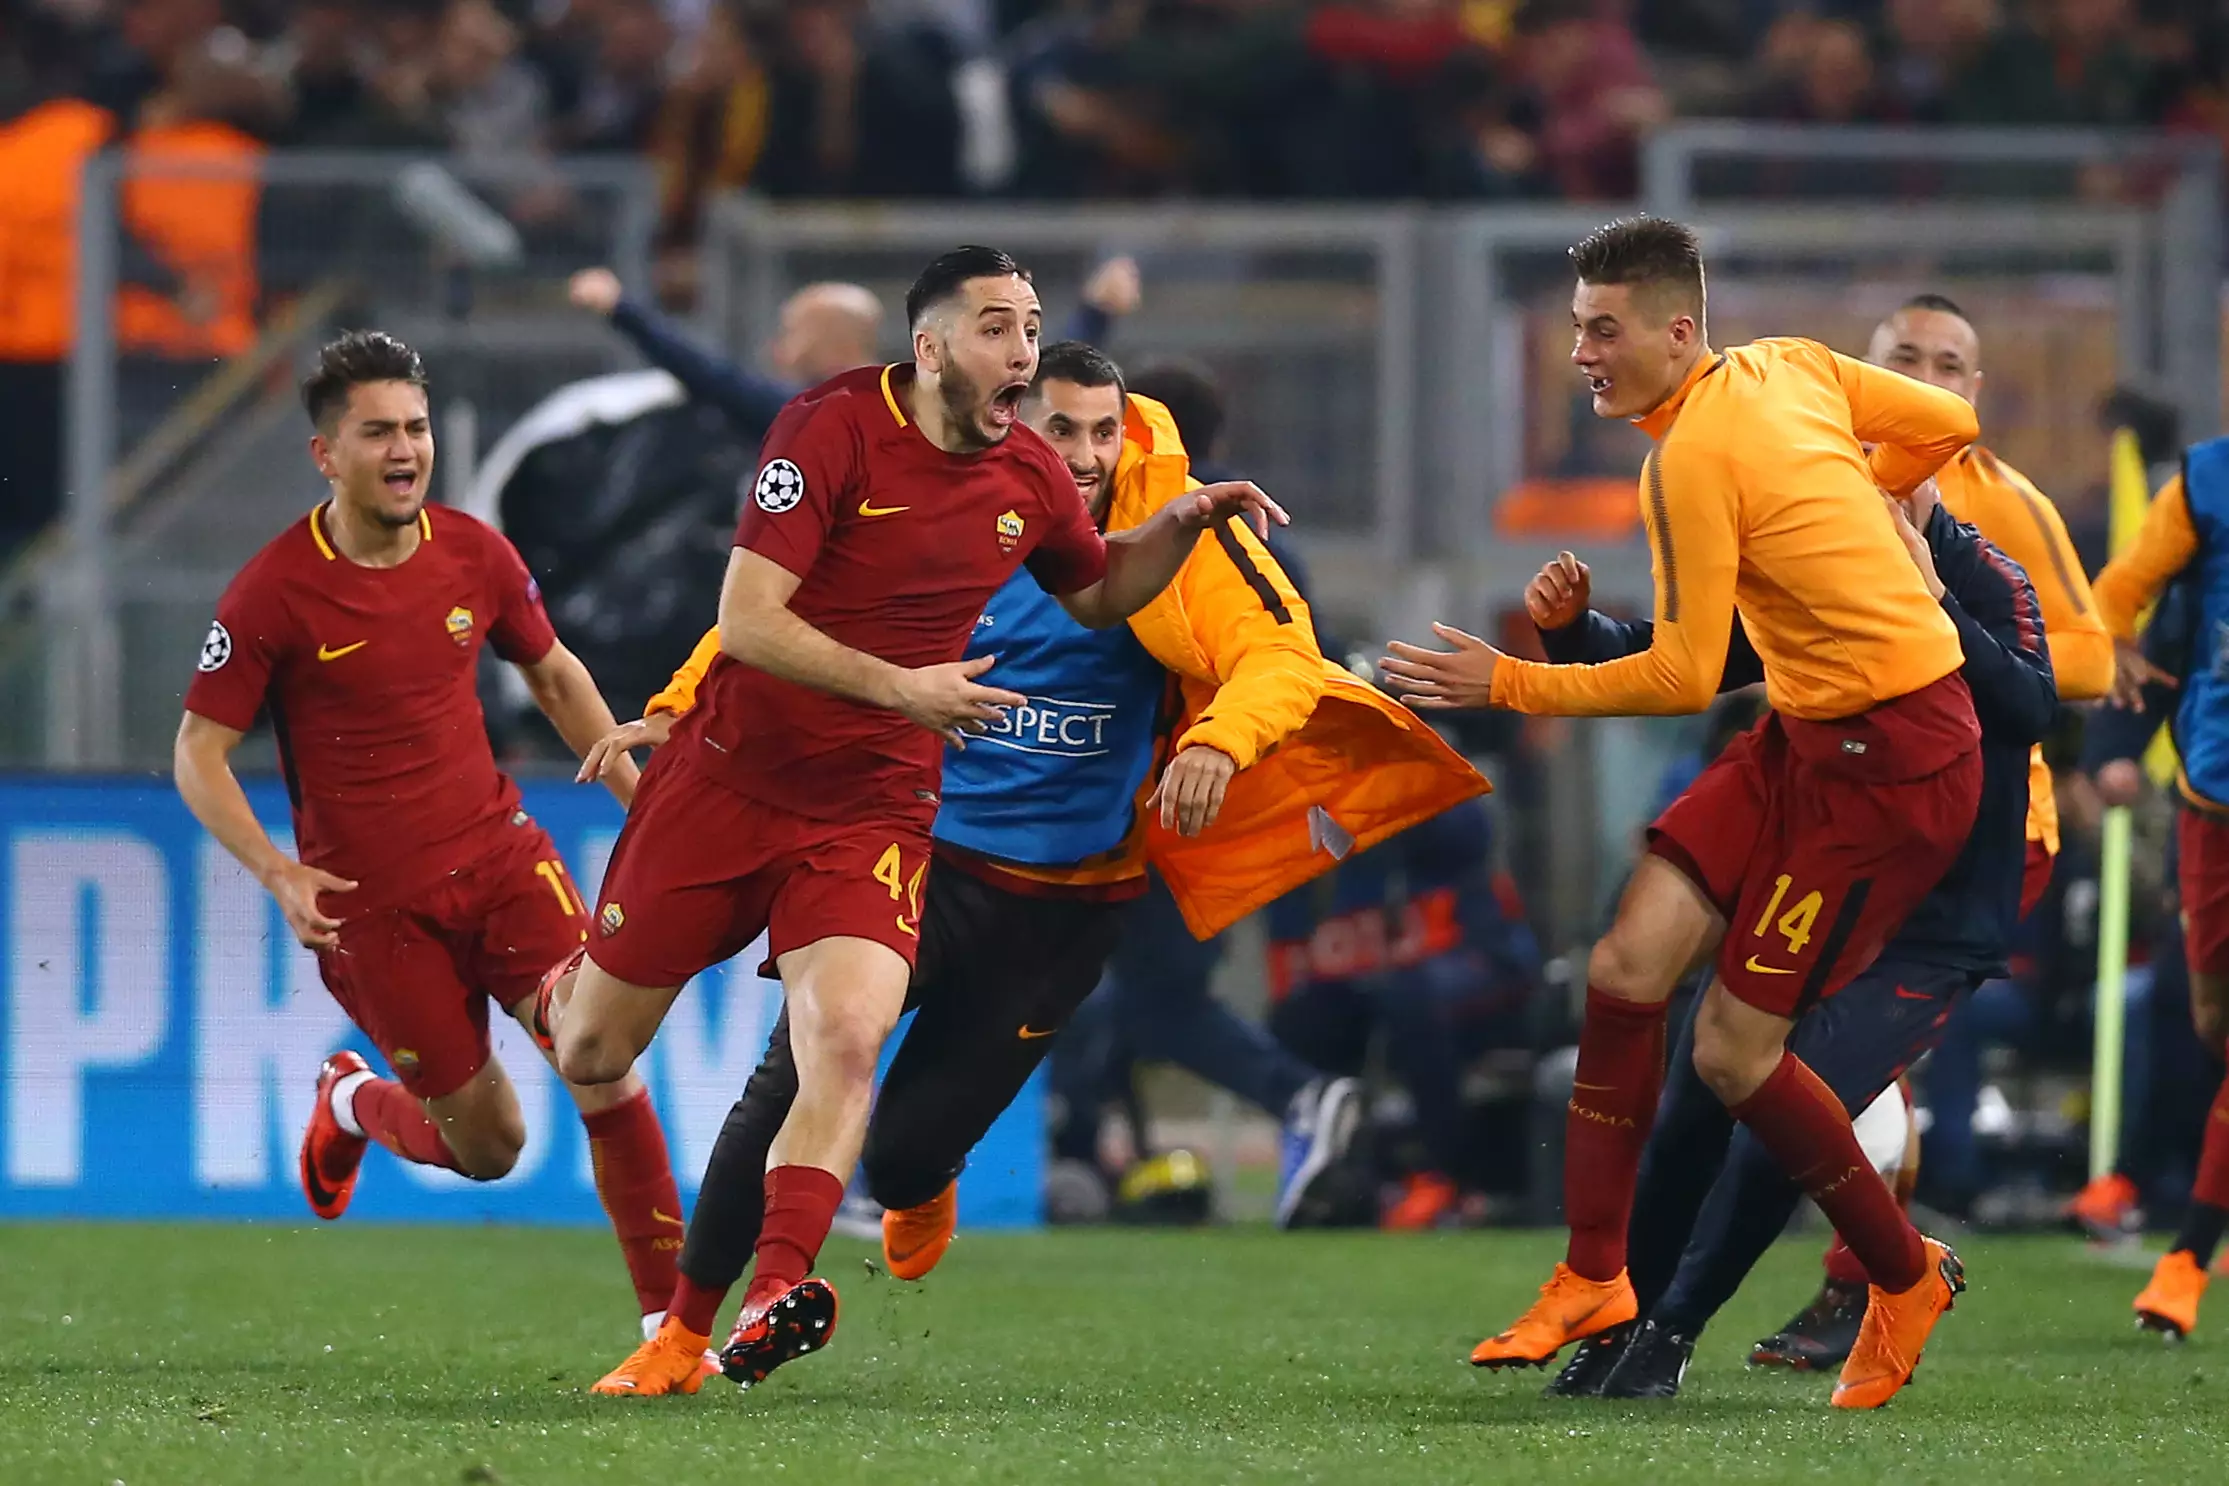 Manolas famously scored Roma's winner against Barcelona in the Champions League last season. Image: PA Images